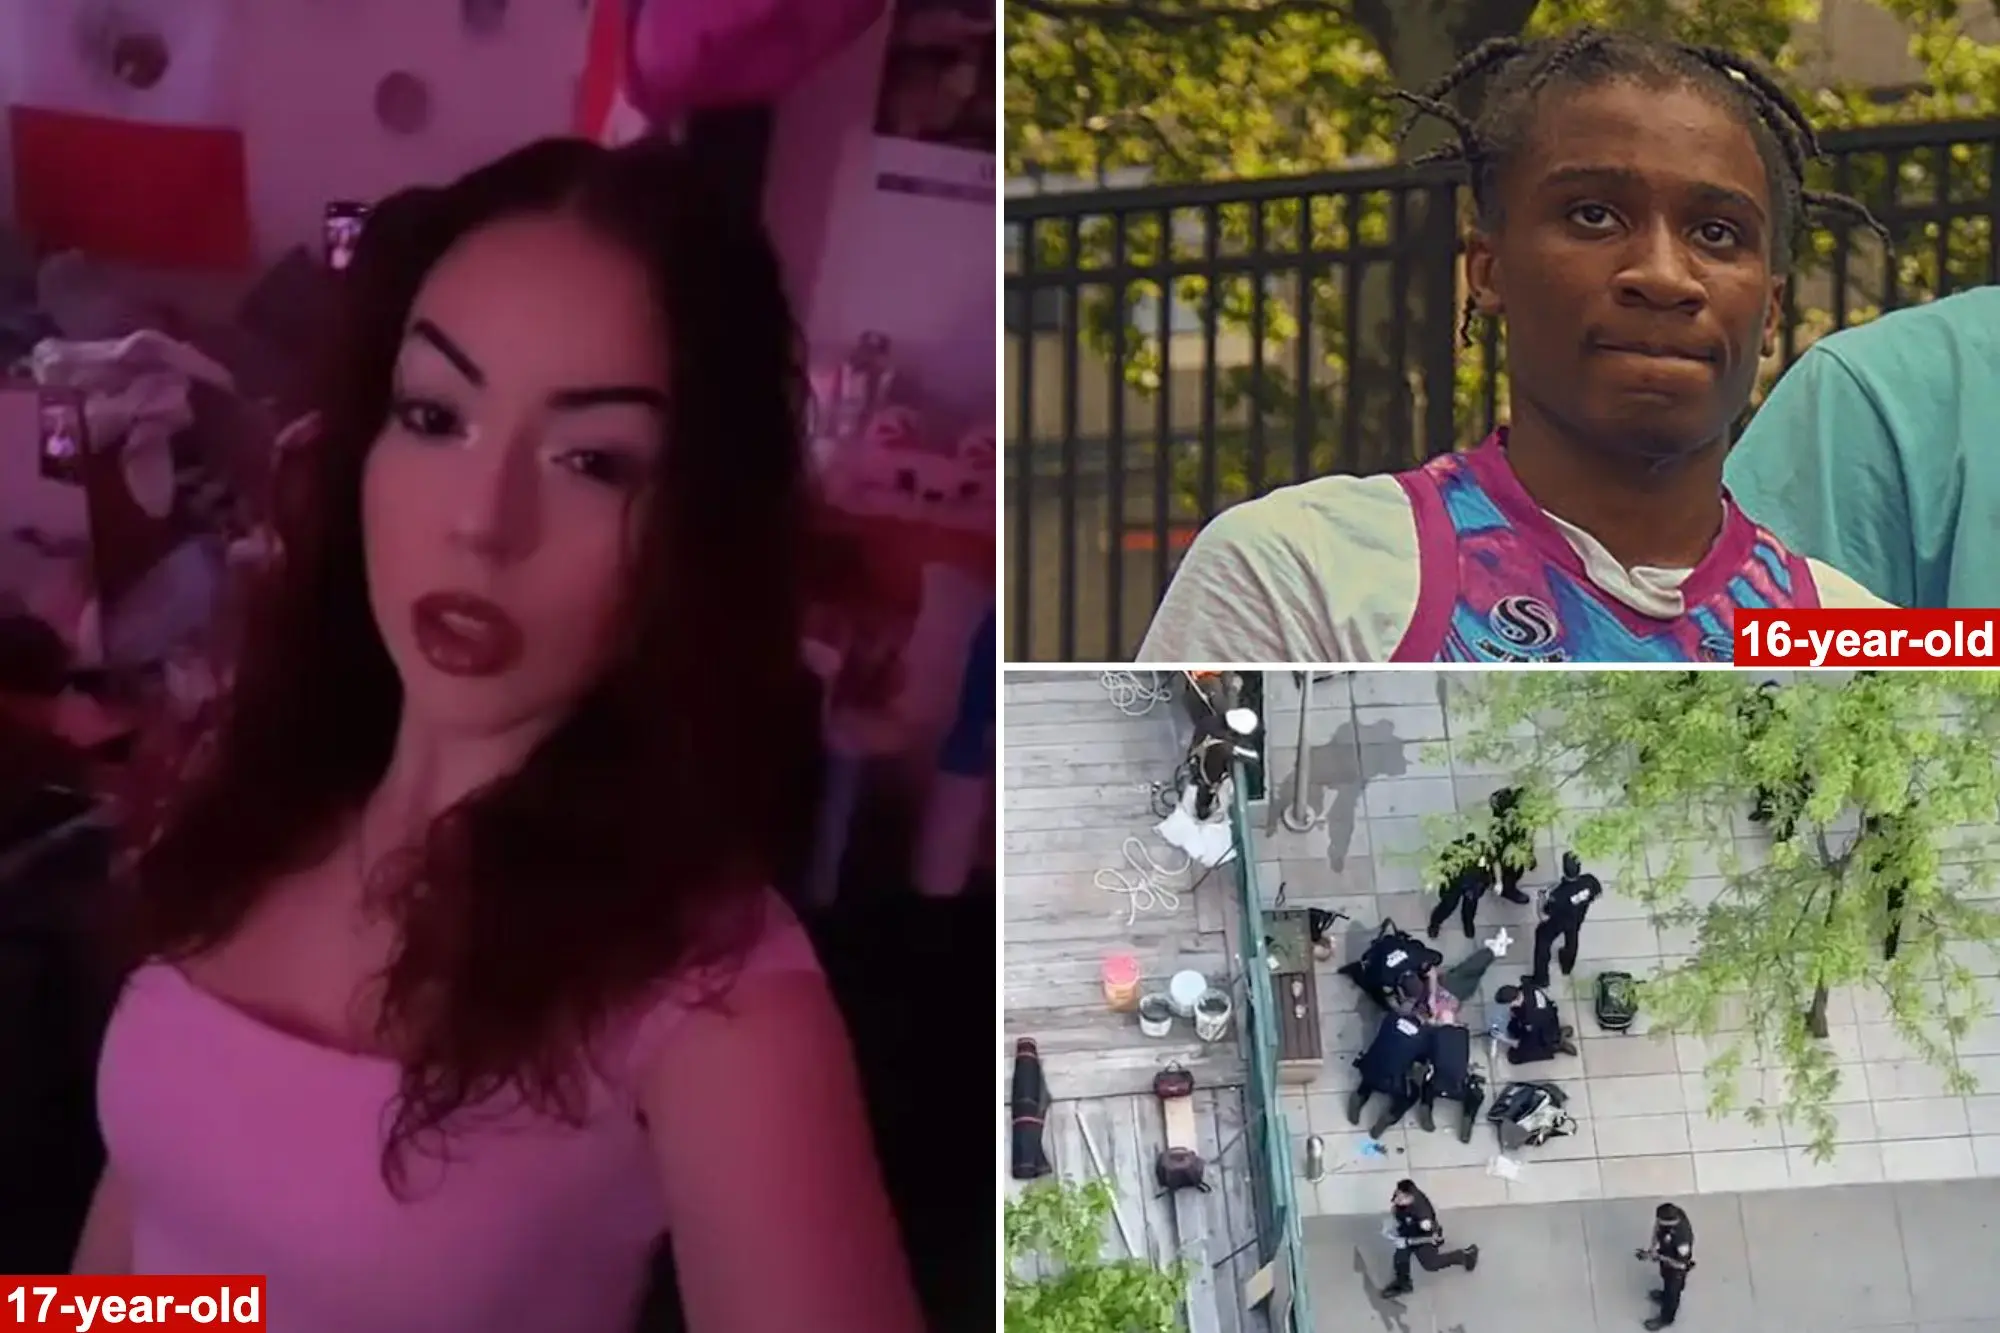 NYC Teens in Peril: Two Killed, Six Wounded in Disturbing Surge of Violence Ahead of Summer